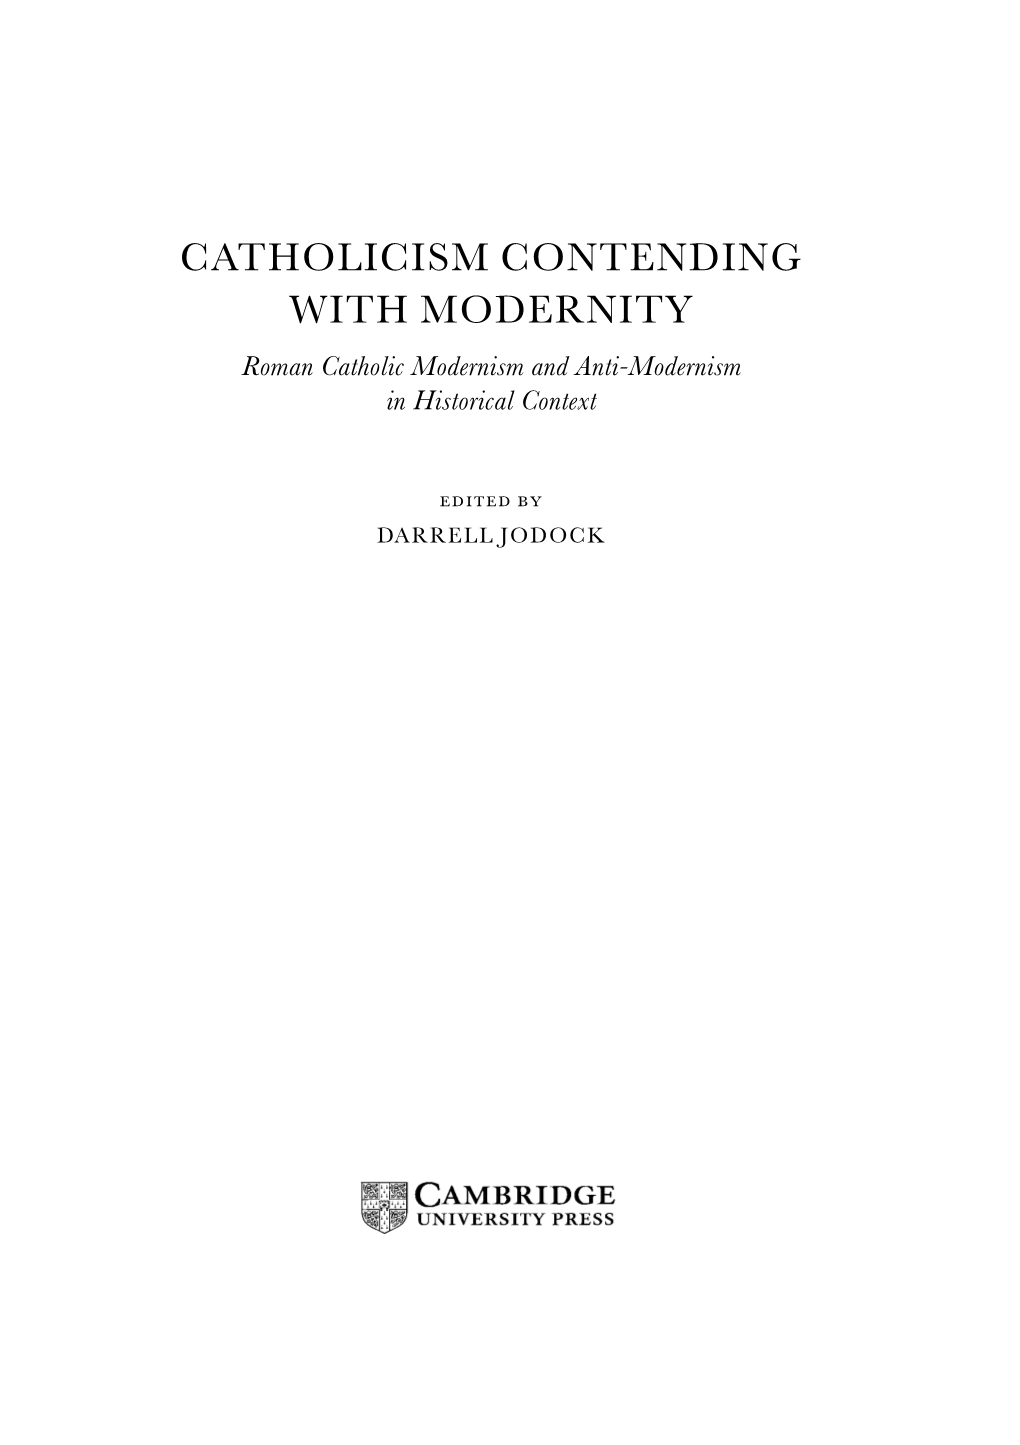 CATHOLICISM CONTENDING with MODERNITY Roman Catholic Modernism and Anti-Modernism in Historical Context